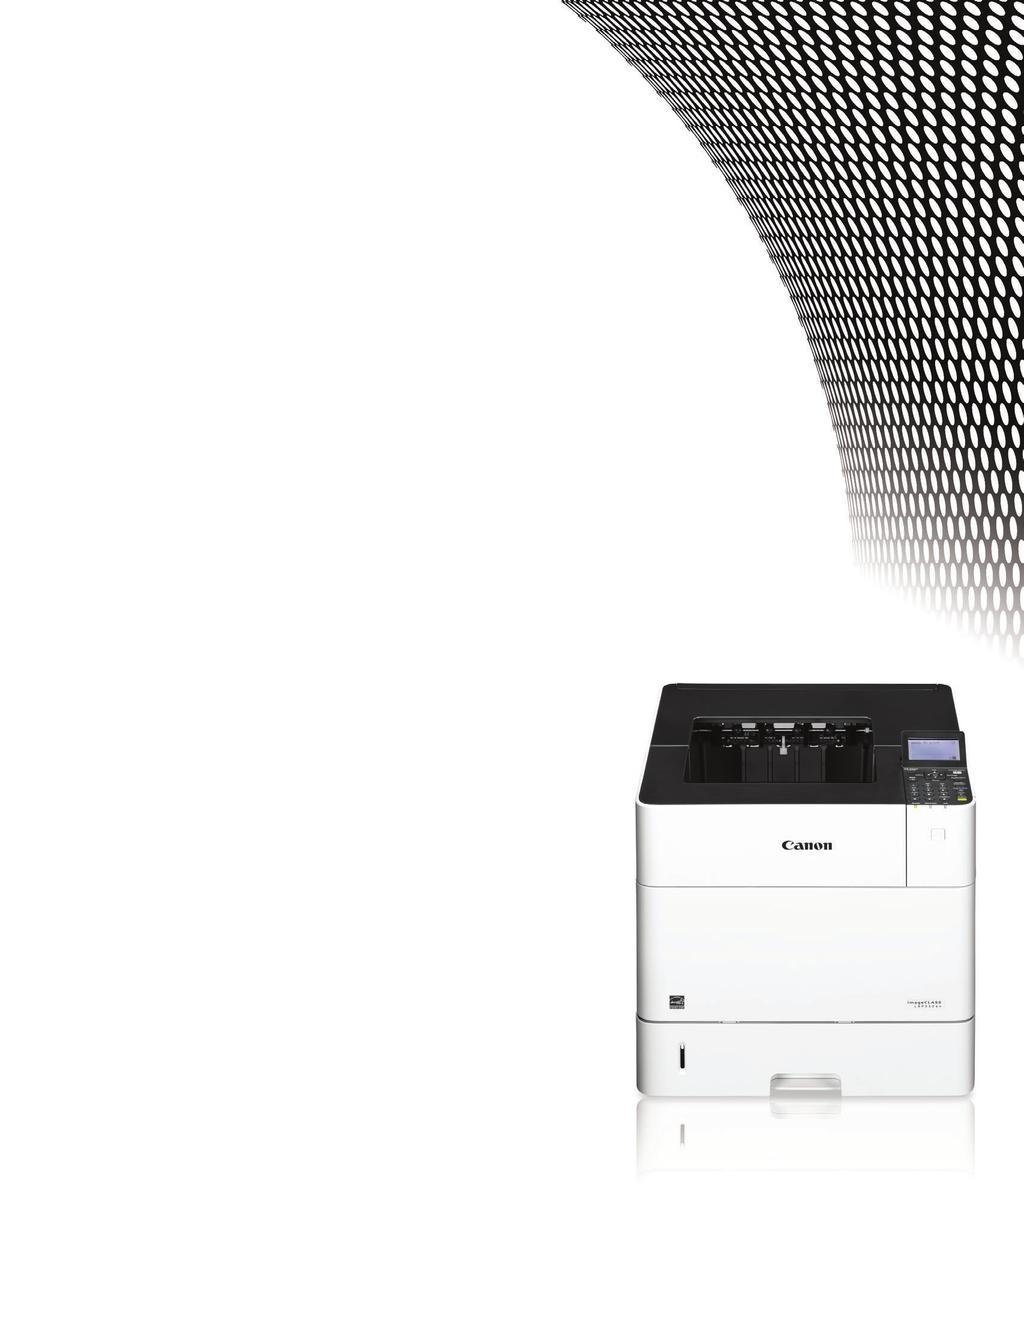 Duplex, Laser Printers REVOLUTIONIZE TODAY S WORKSPACE Lightning-fast, exceptional, black-and-white laser output and prints at speeds of up to 65 pages per minute* (LBP352dn) and 58 pages per minute*